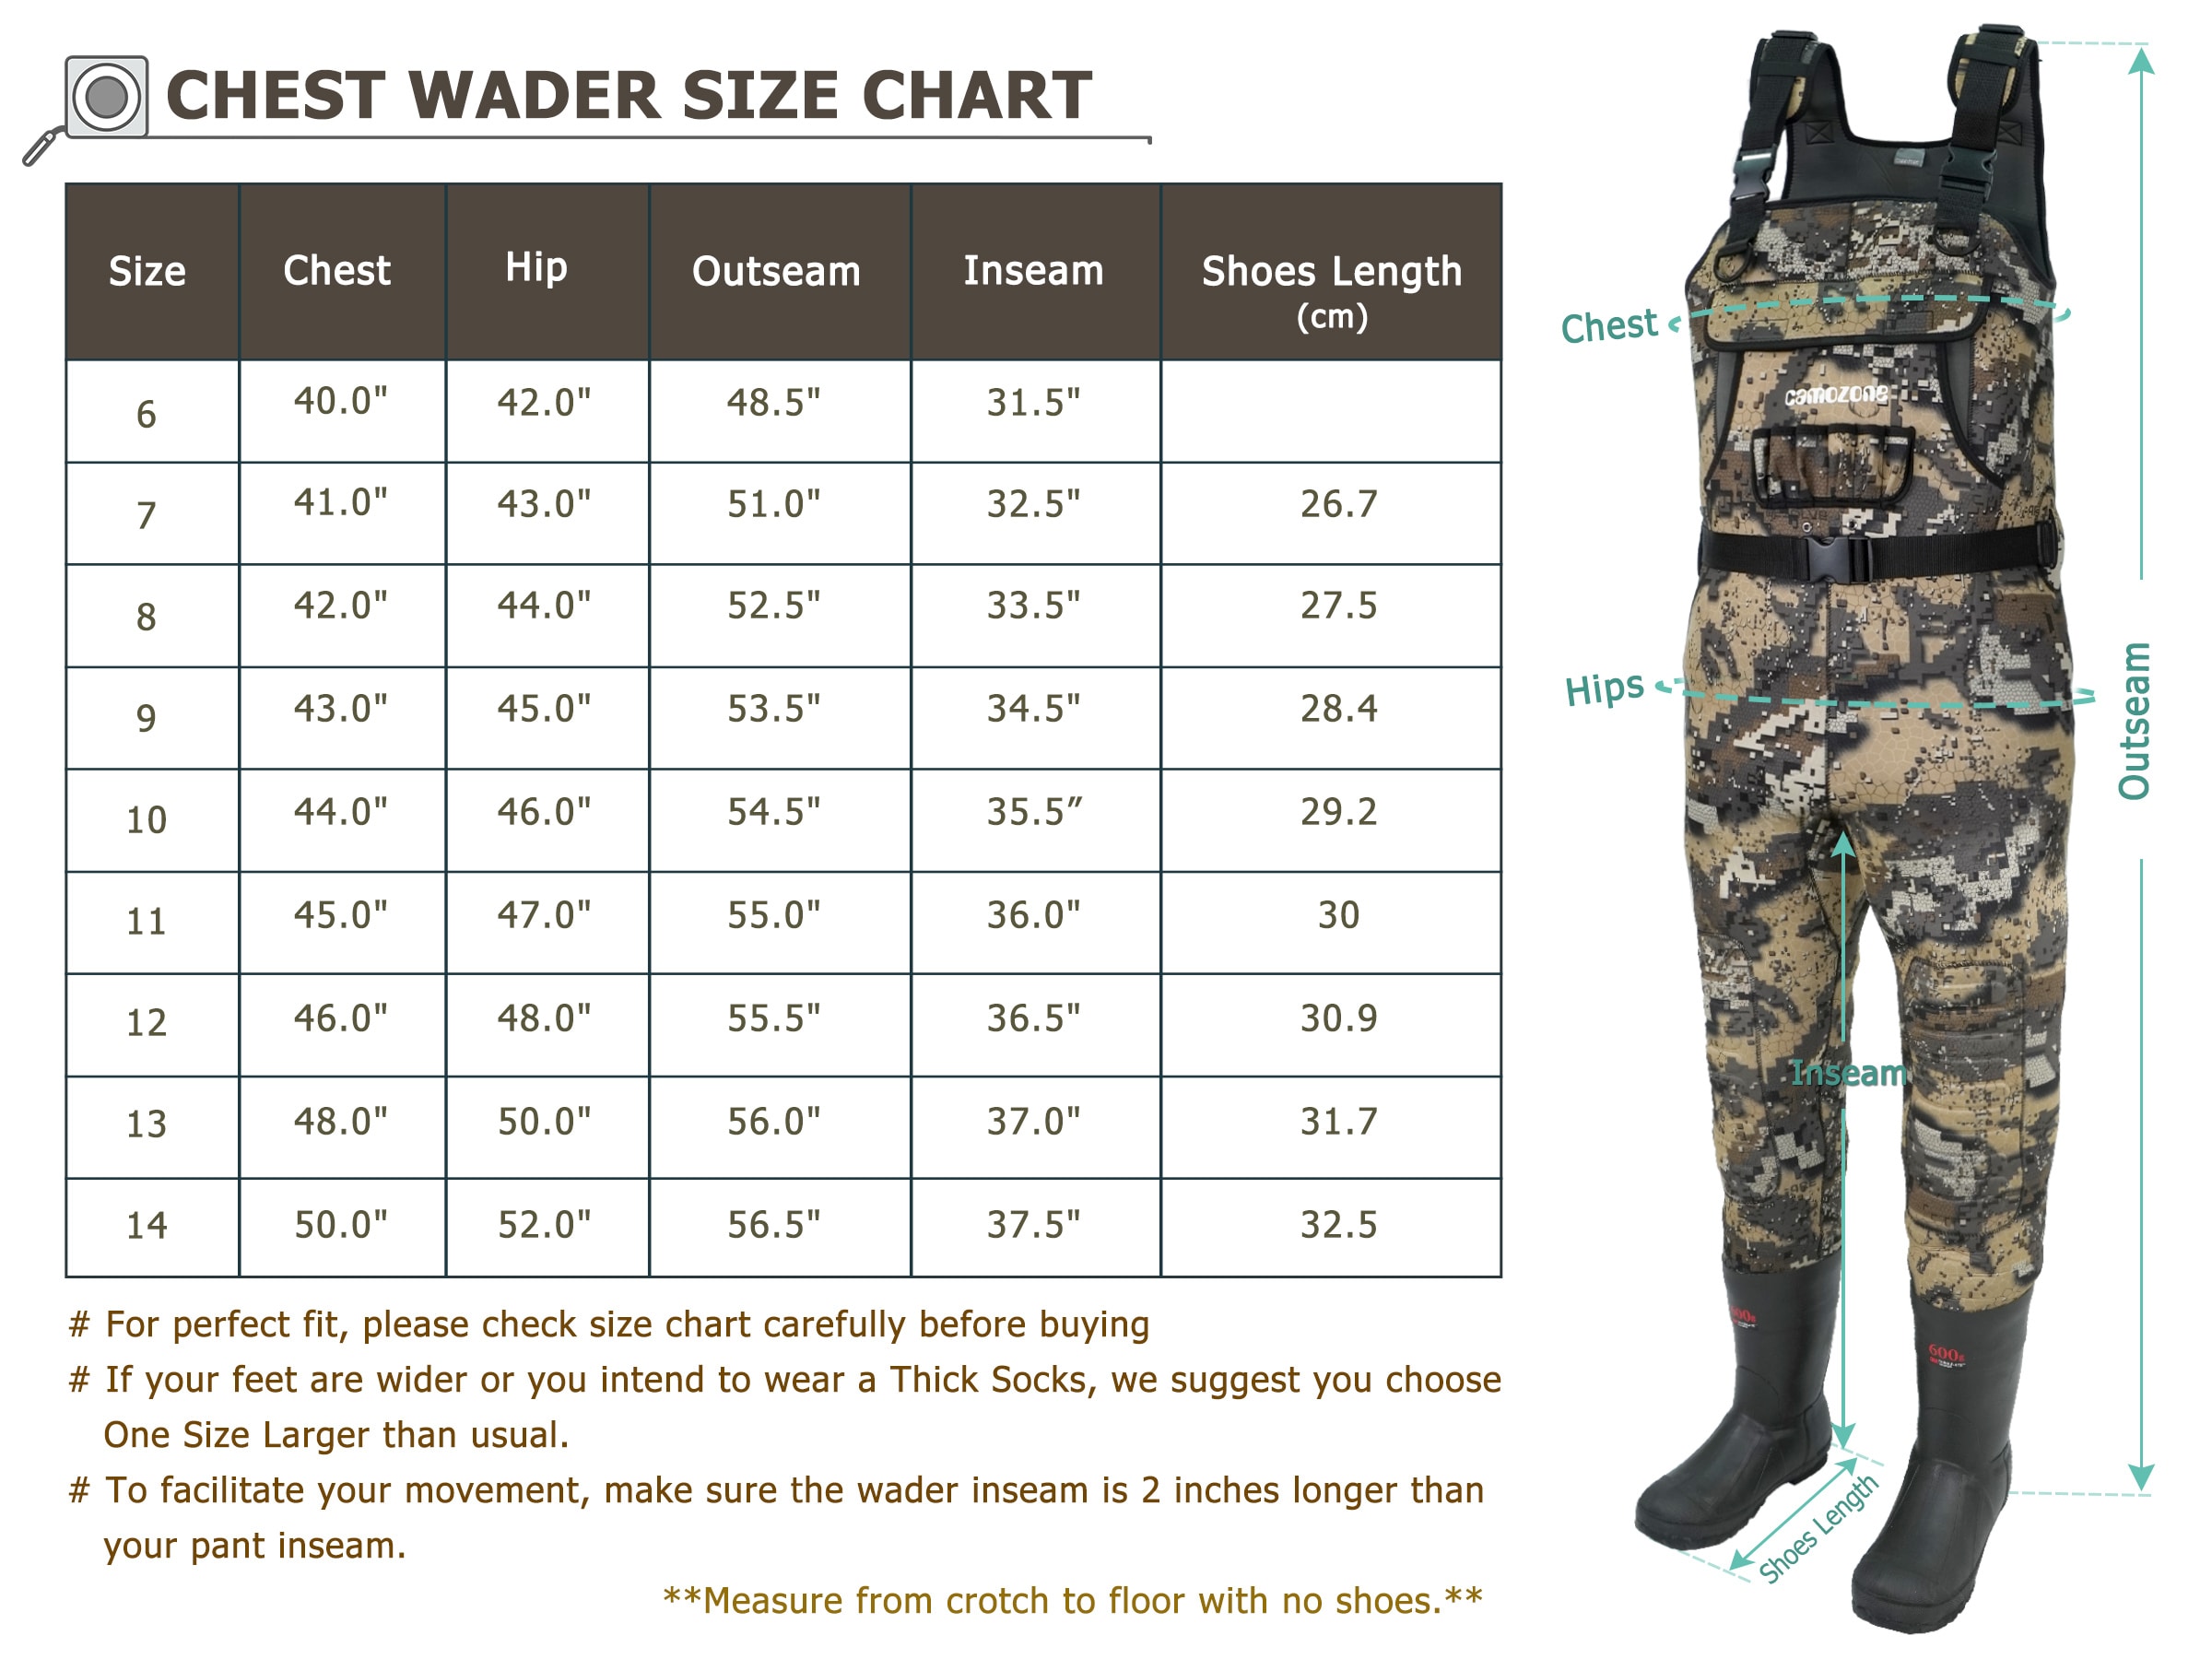 CAMOZONE Neoprene Chest Waders with Boots-size8 Unisex Fishing